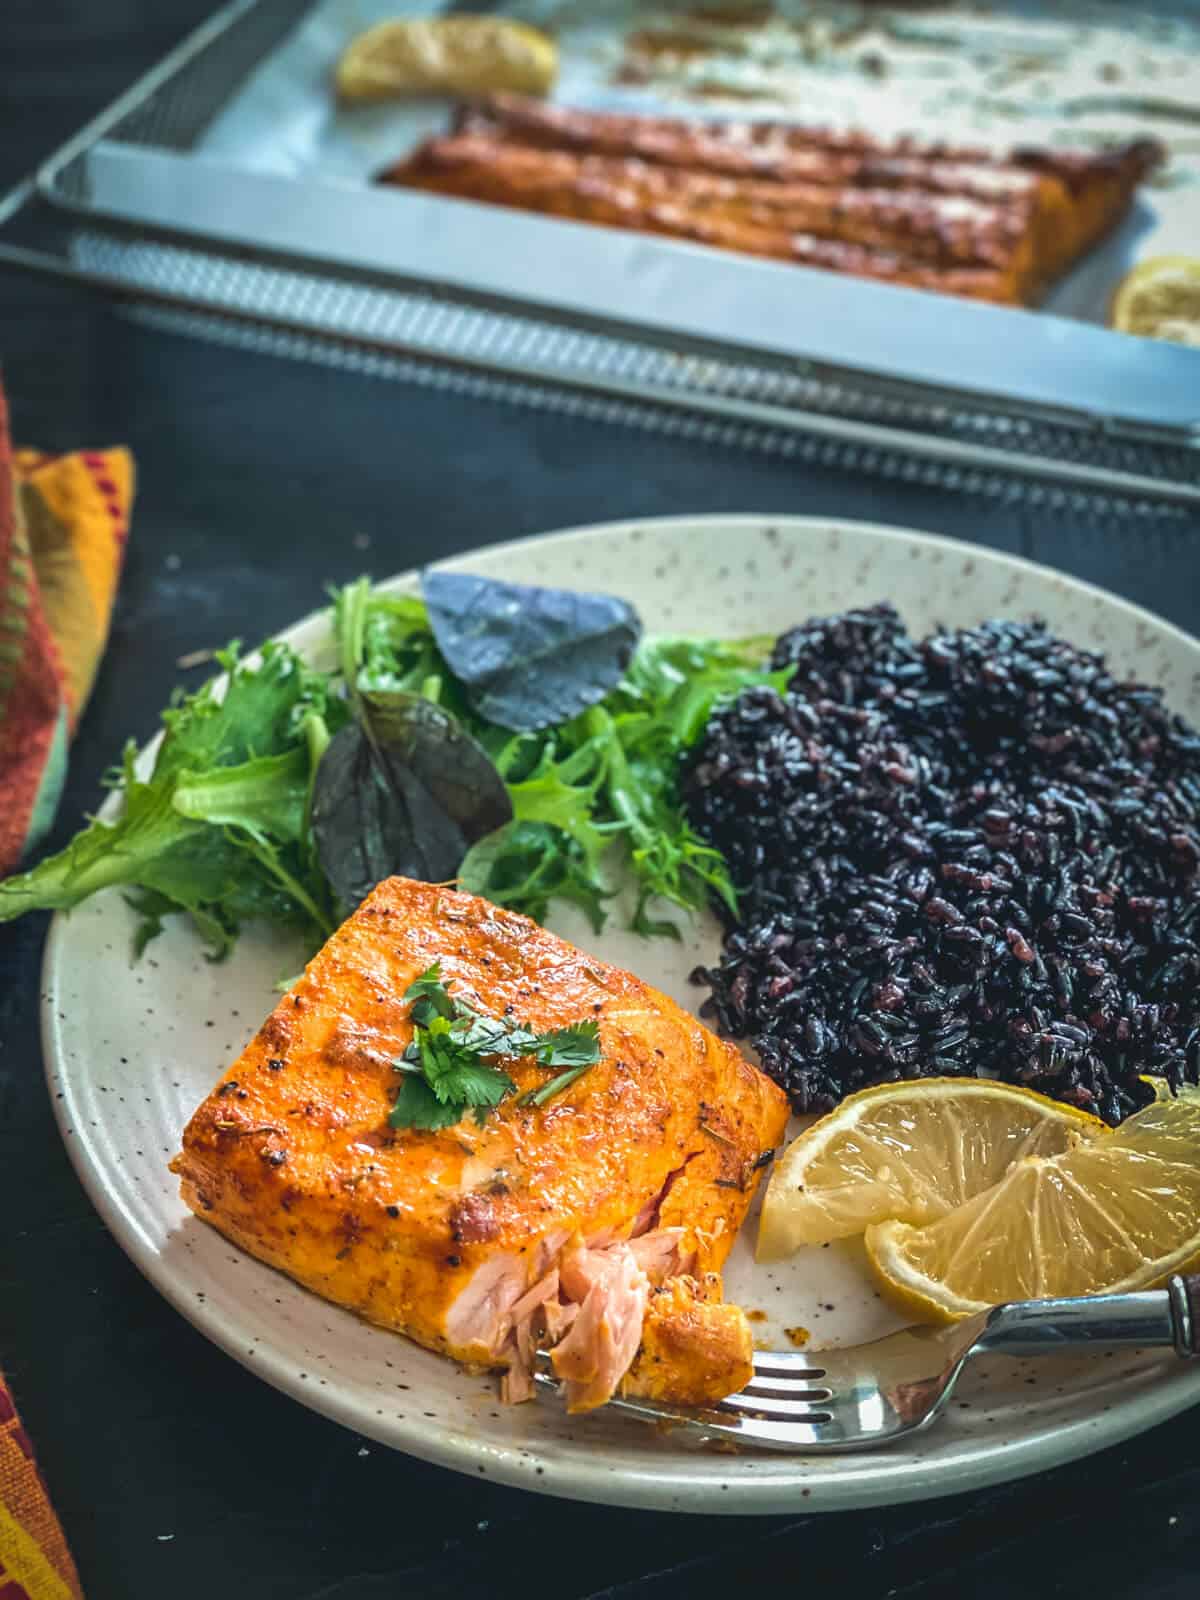 A plate filled with a cooked salmon filet, black rice, and salad on the side.